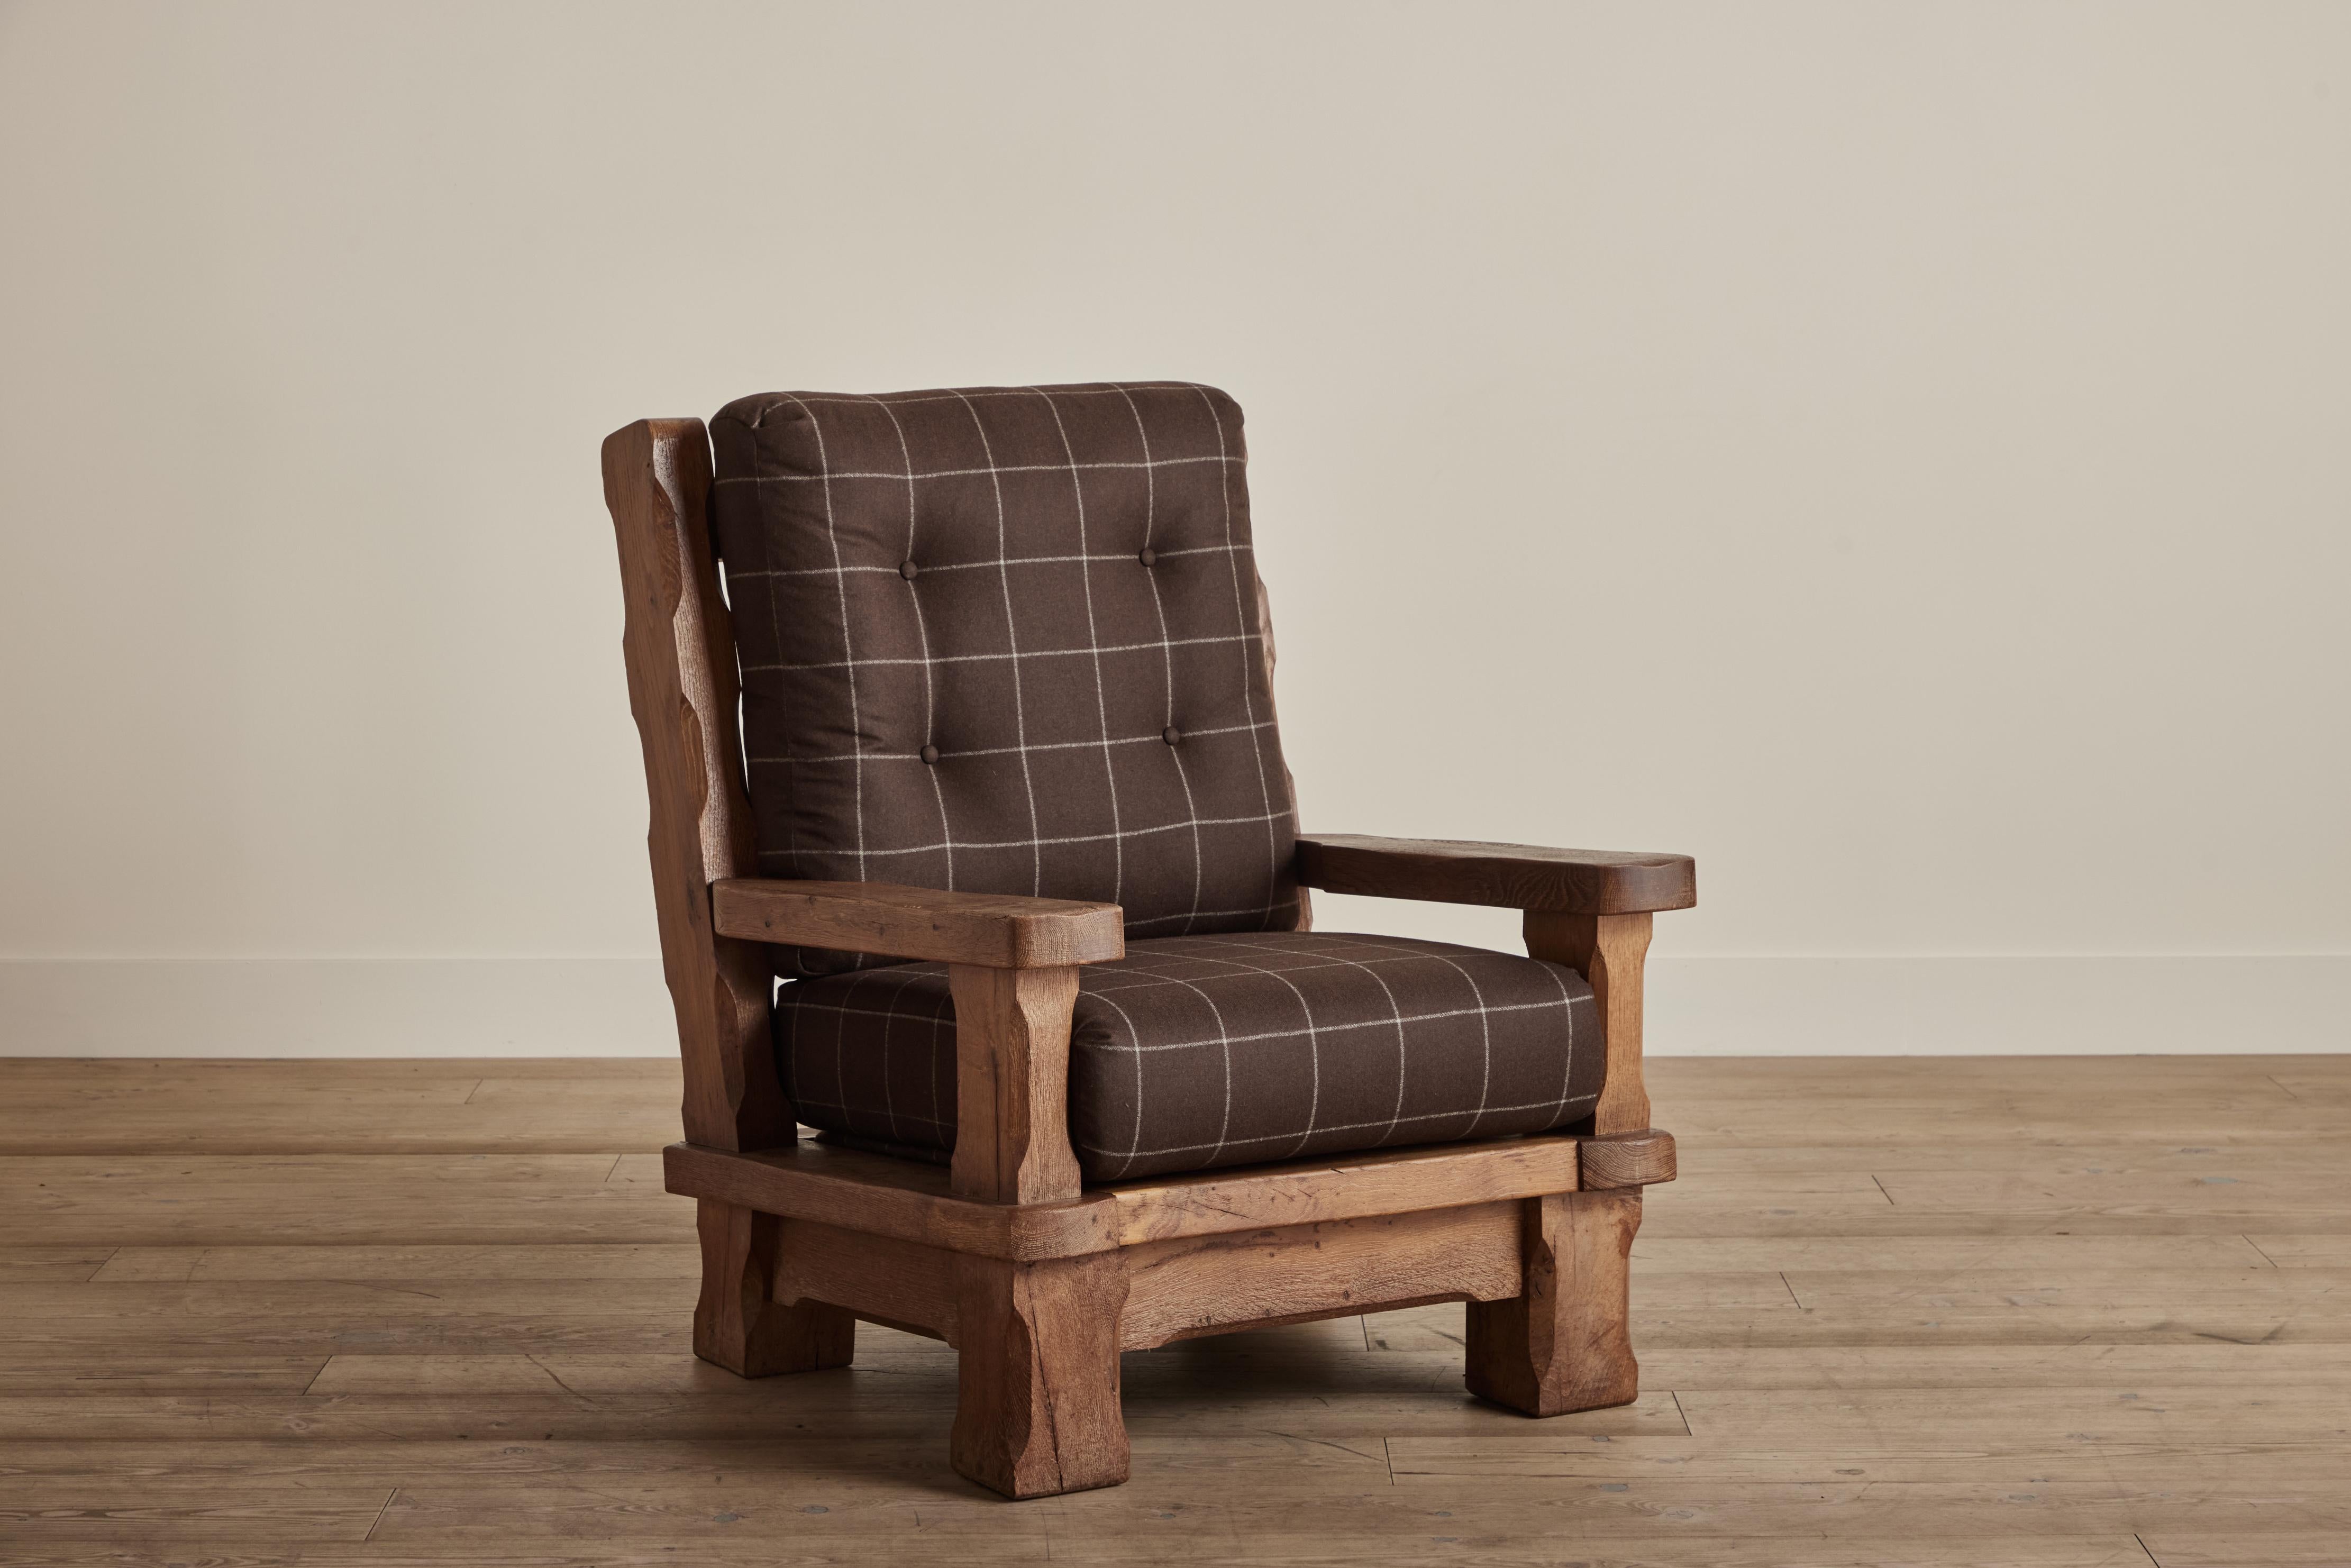 Large Brutalist armchair made of solid oak wood. Chair has new cushion featuring a soft flannel fabric from Holland and Sherry. Some visible wear on wood that is consistent with age and use. 